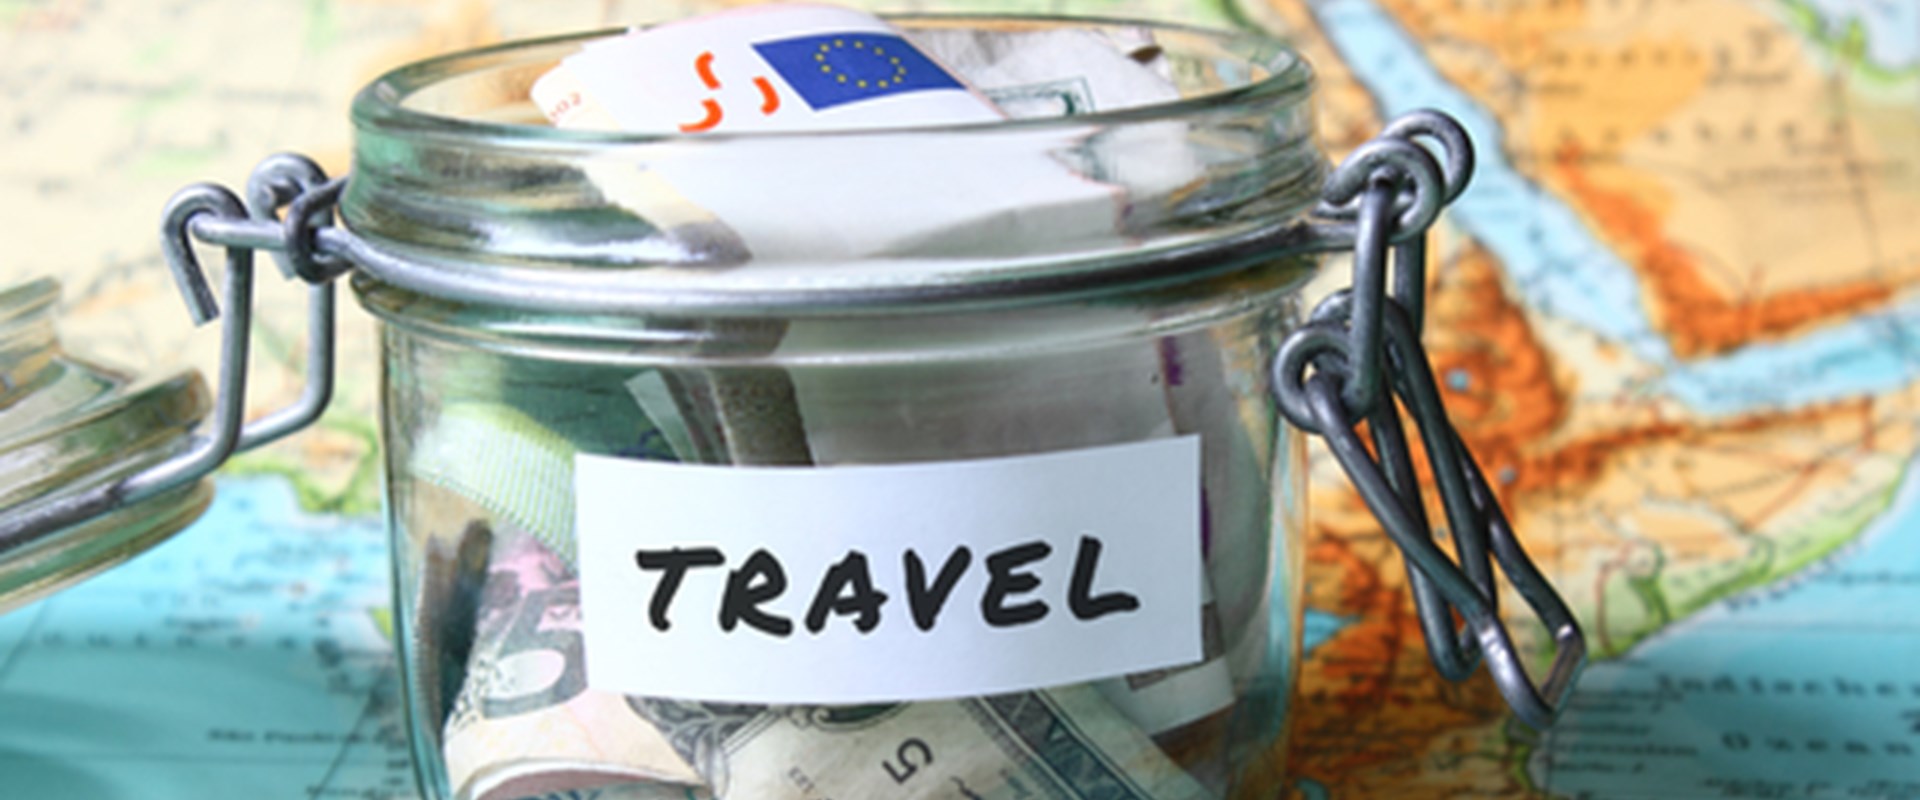 Save Money on Your Holiday Travel